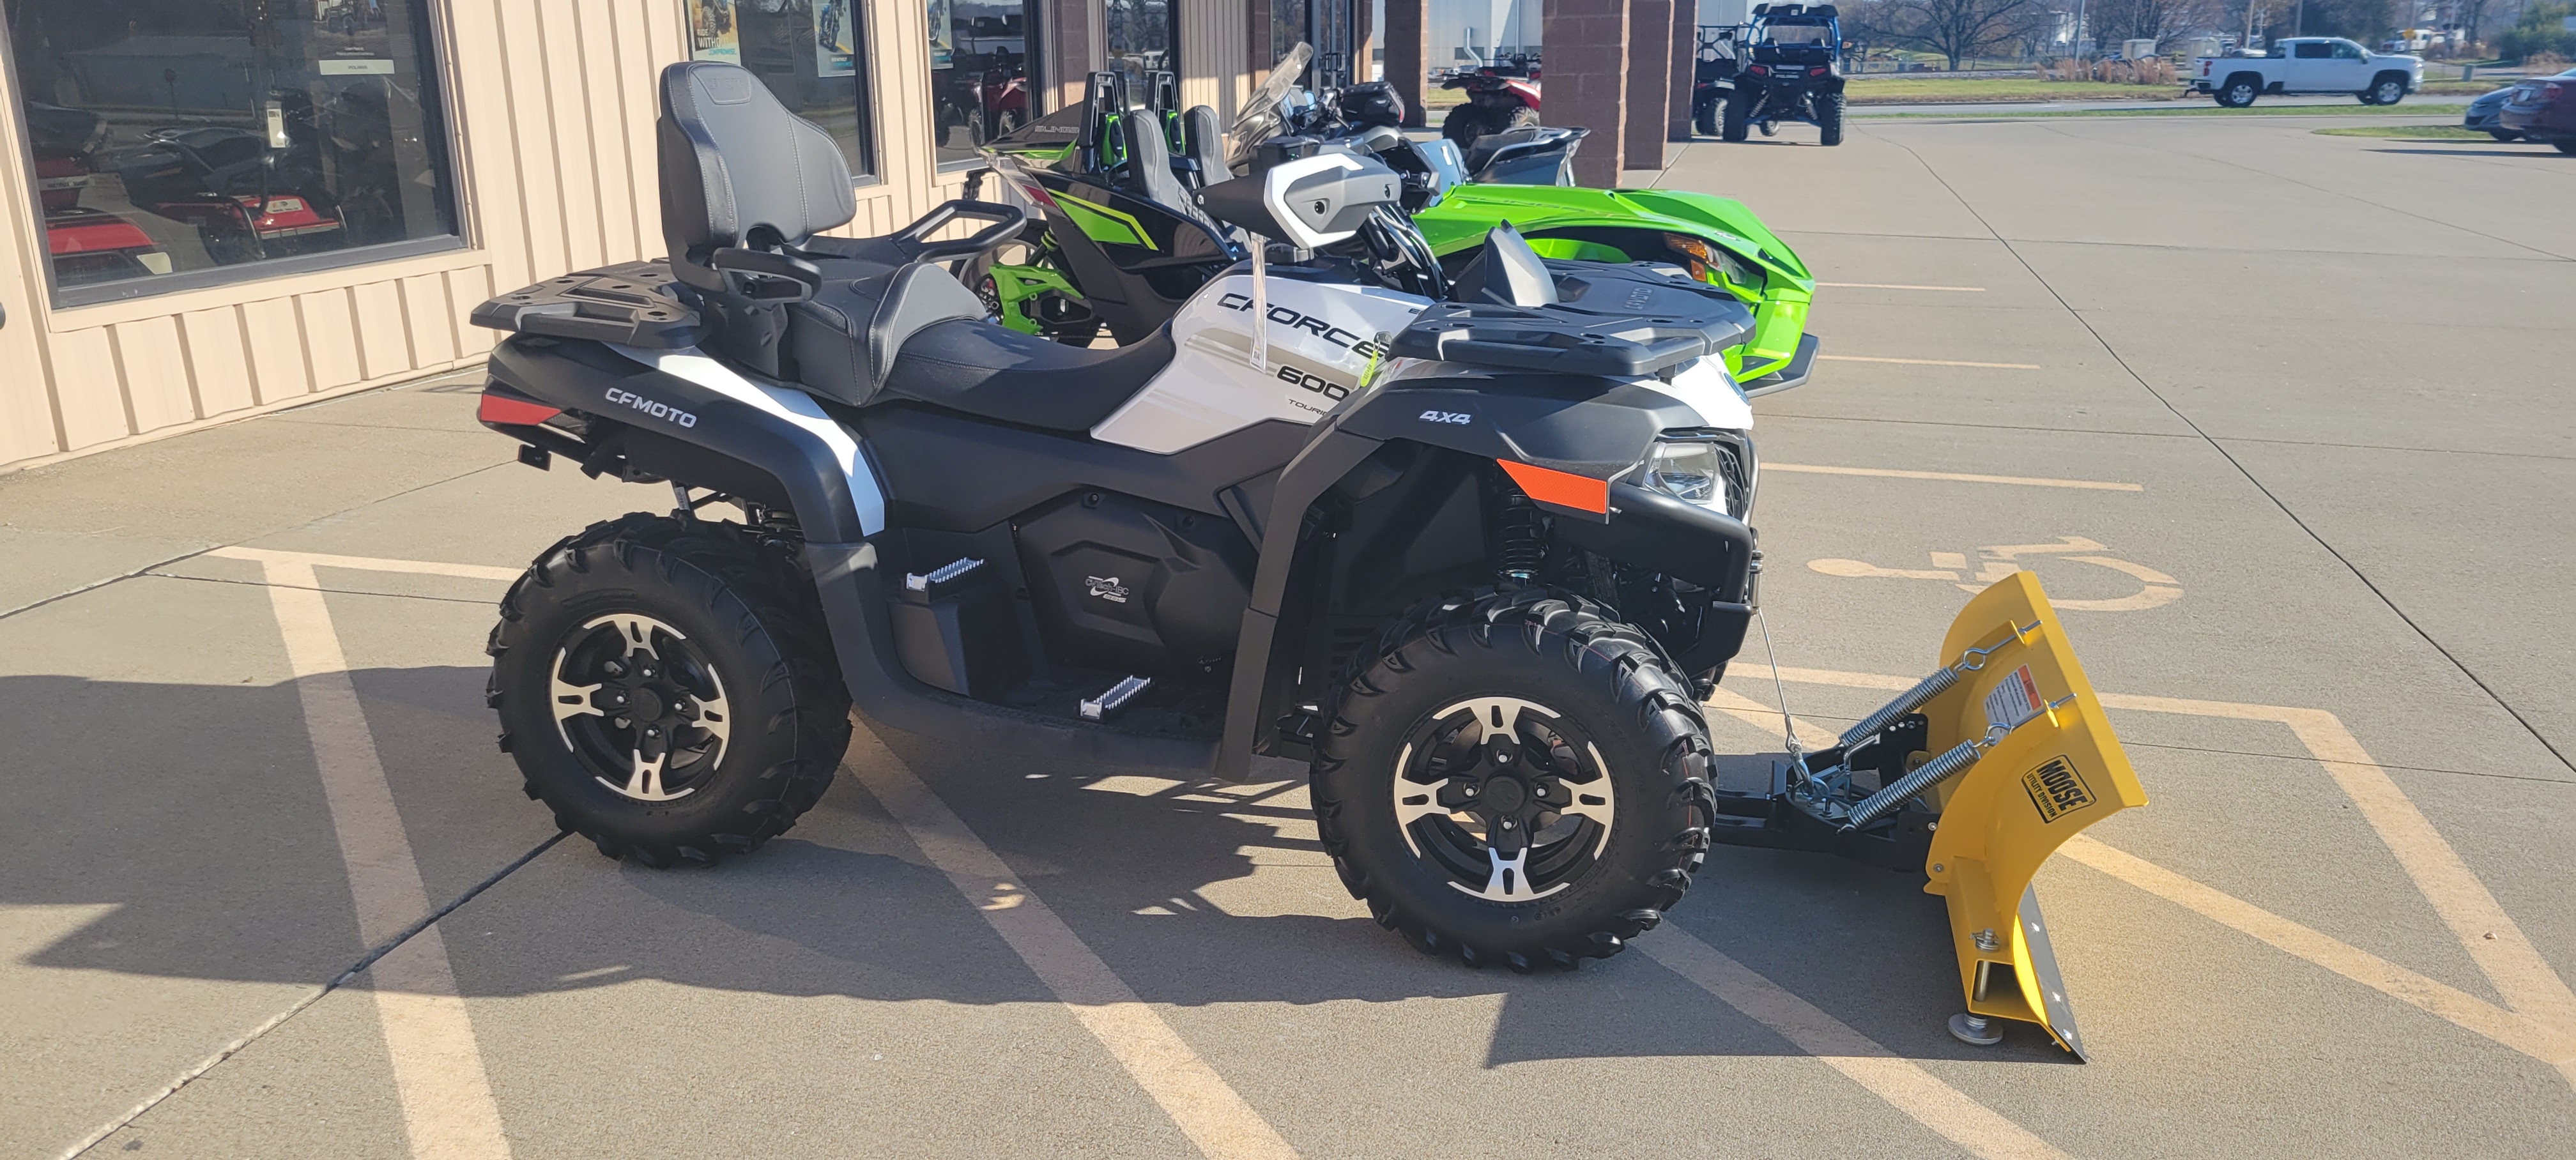 2022 CFMOTO CFORCE 600 Touring at Brenny's Motorcycle Clinic, Bettendorf, IA 52722